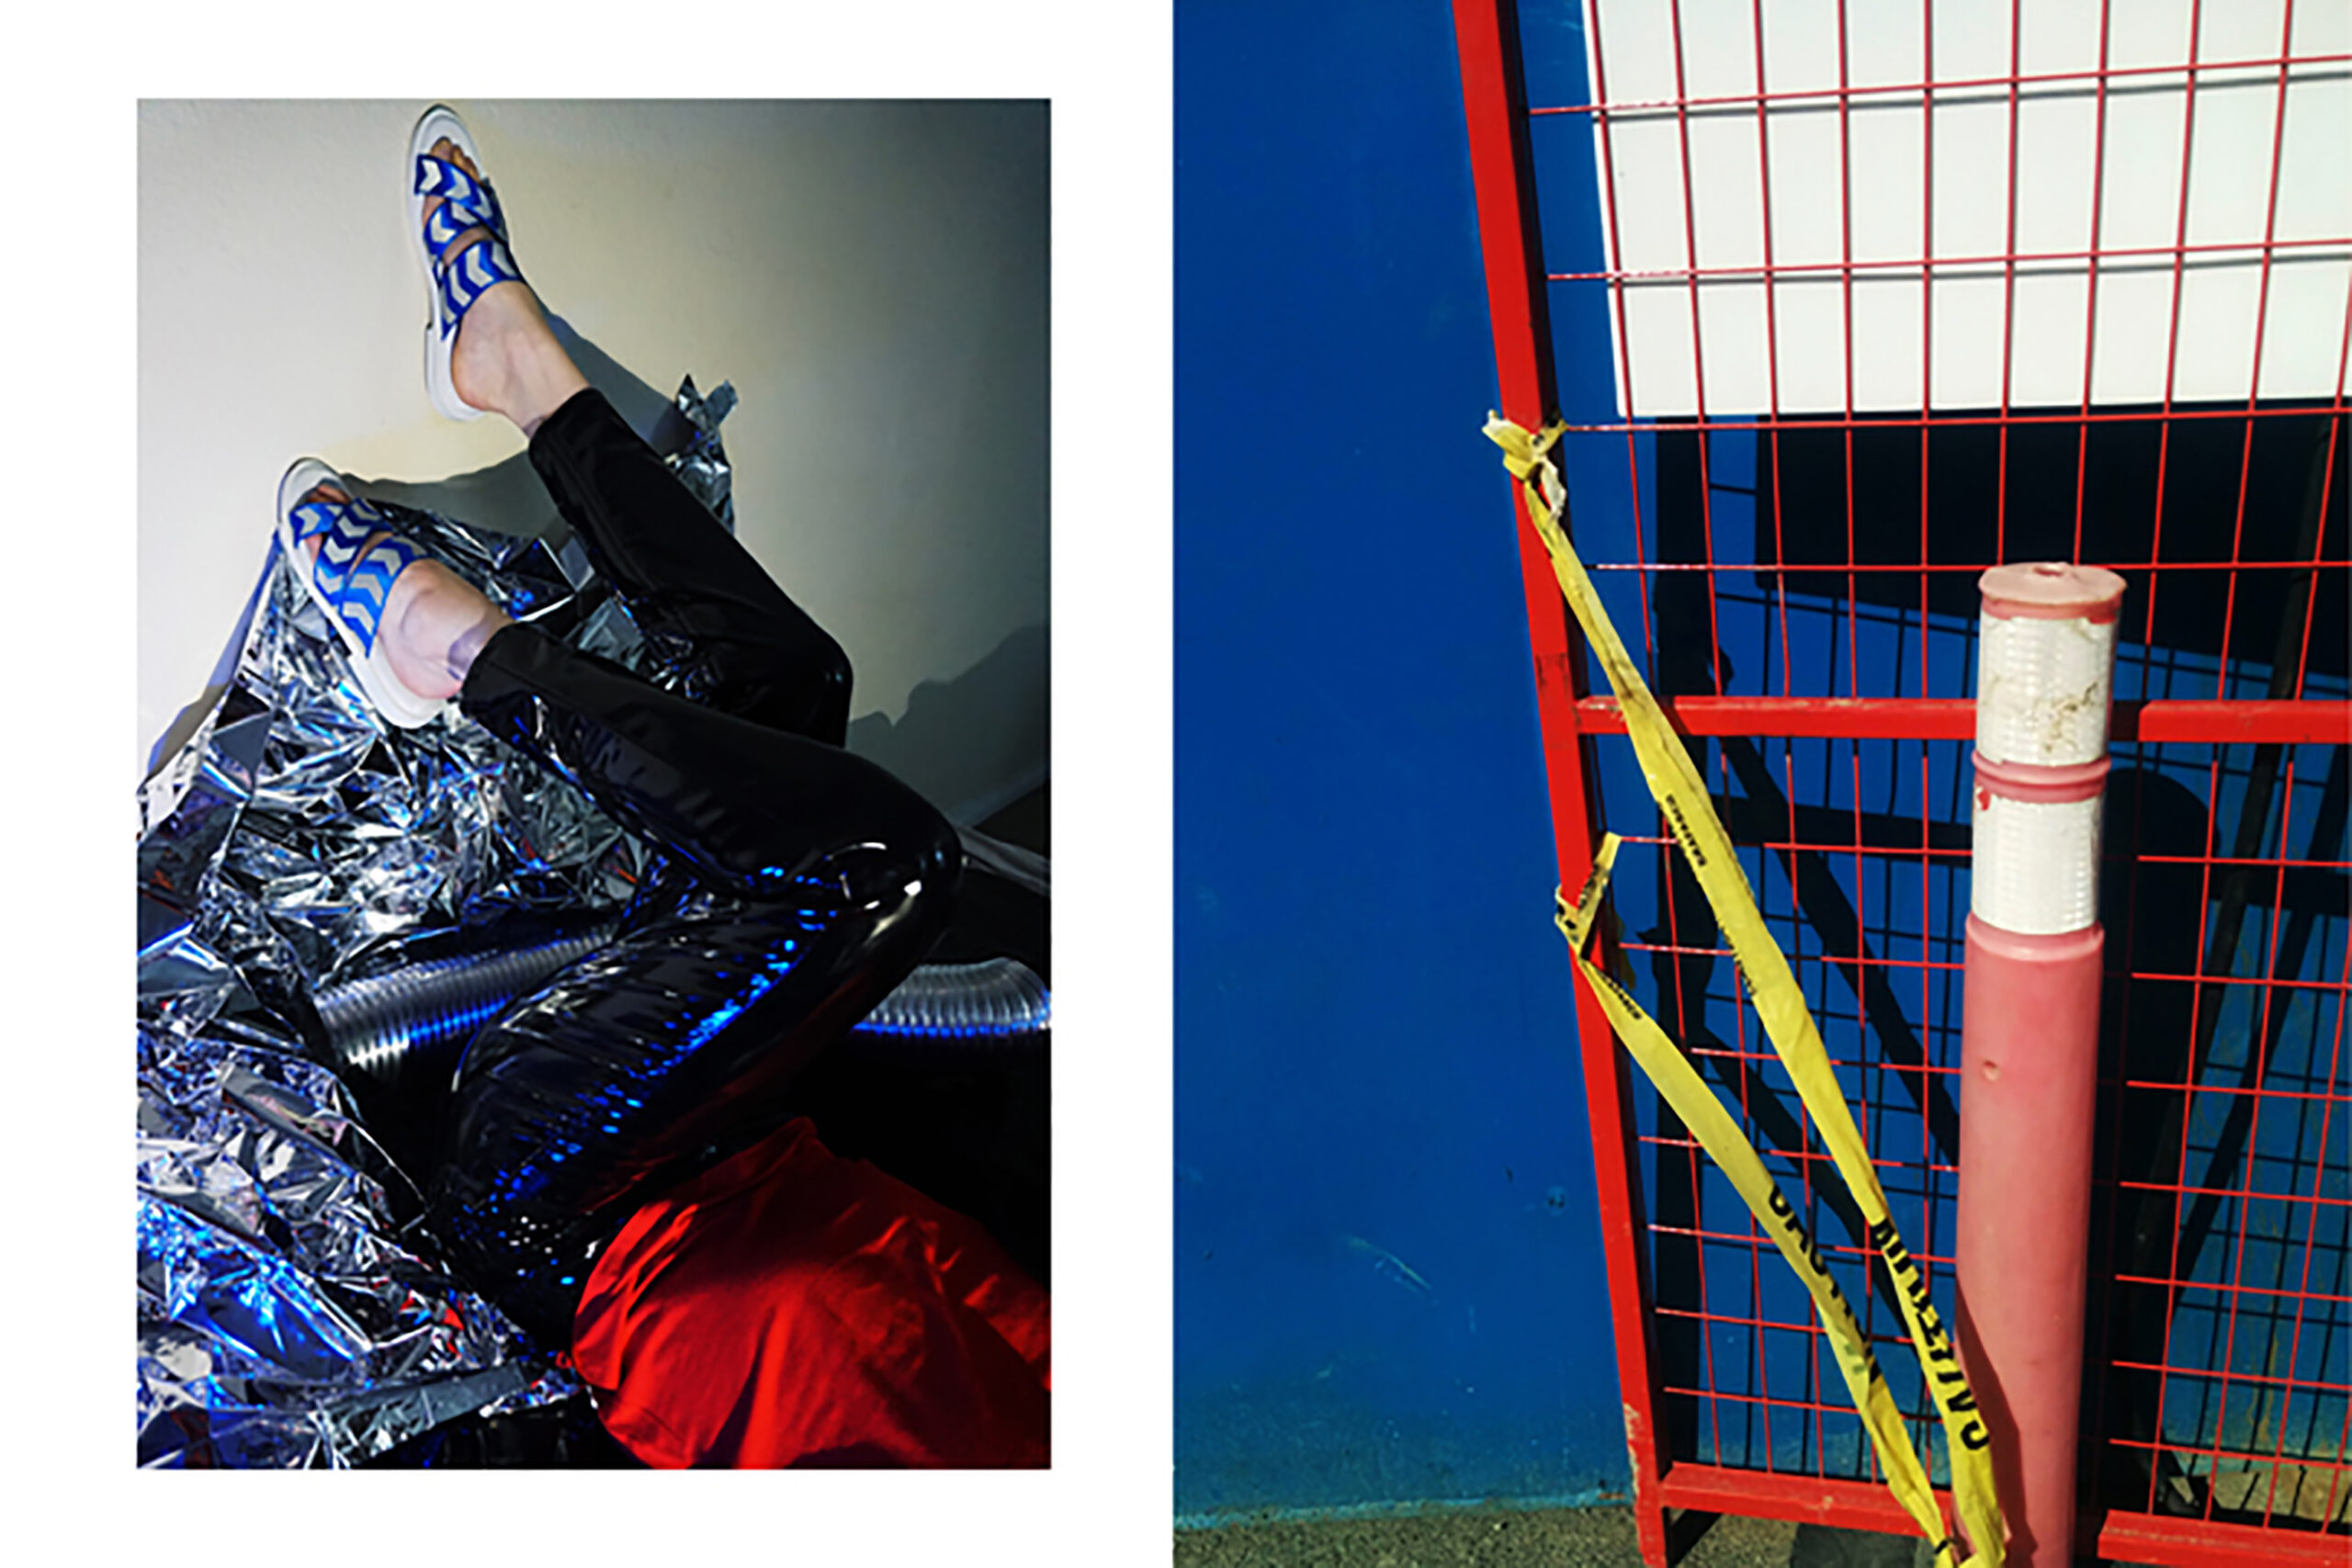 2 images side by side, model shows construction primary blue sandals next to construction fence and metal piping